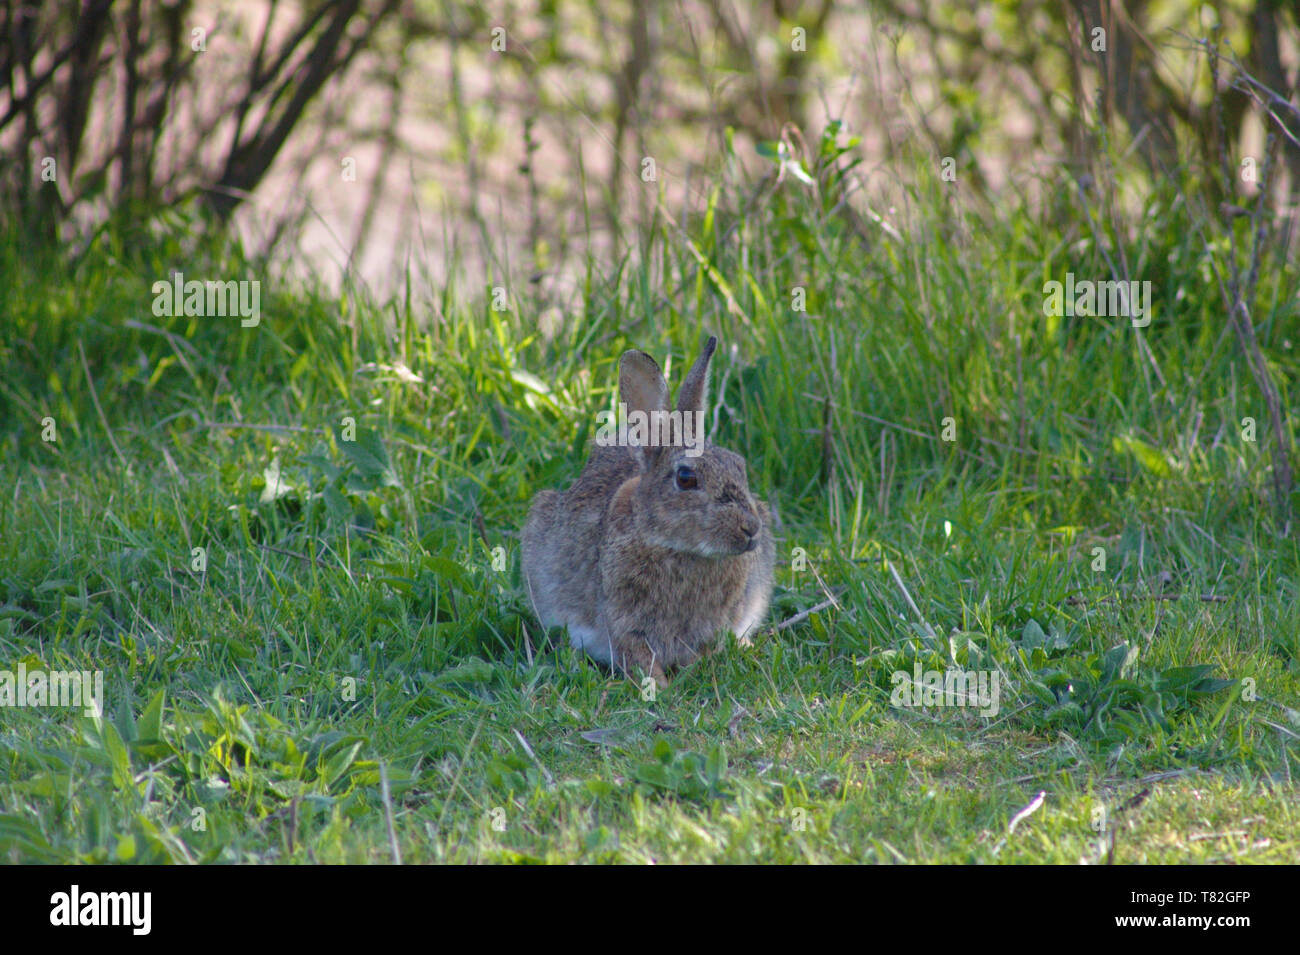 Wild rabbit (lepus cuniculus) sitting in the grass. Wildlife in South England. Stock Photo